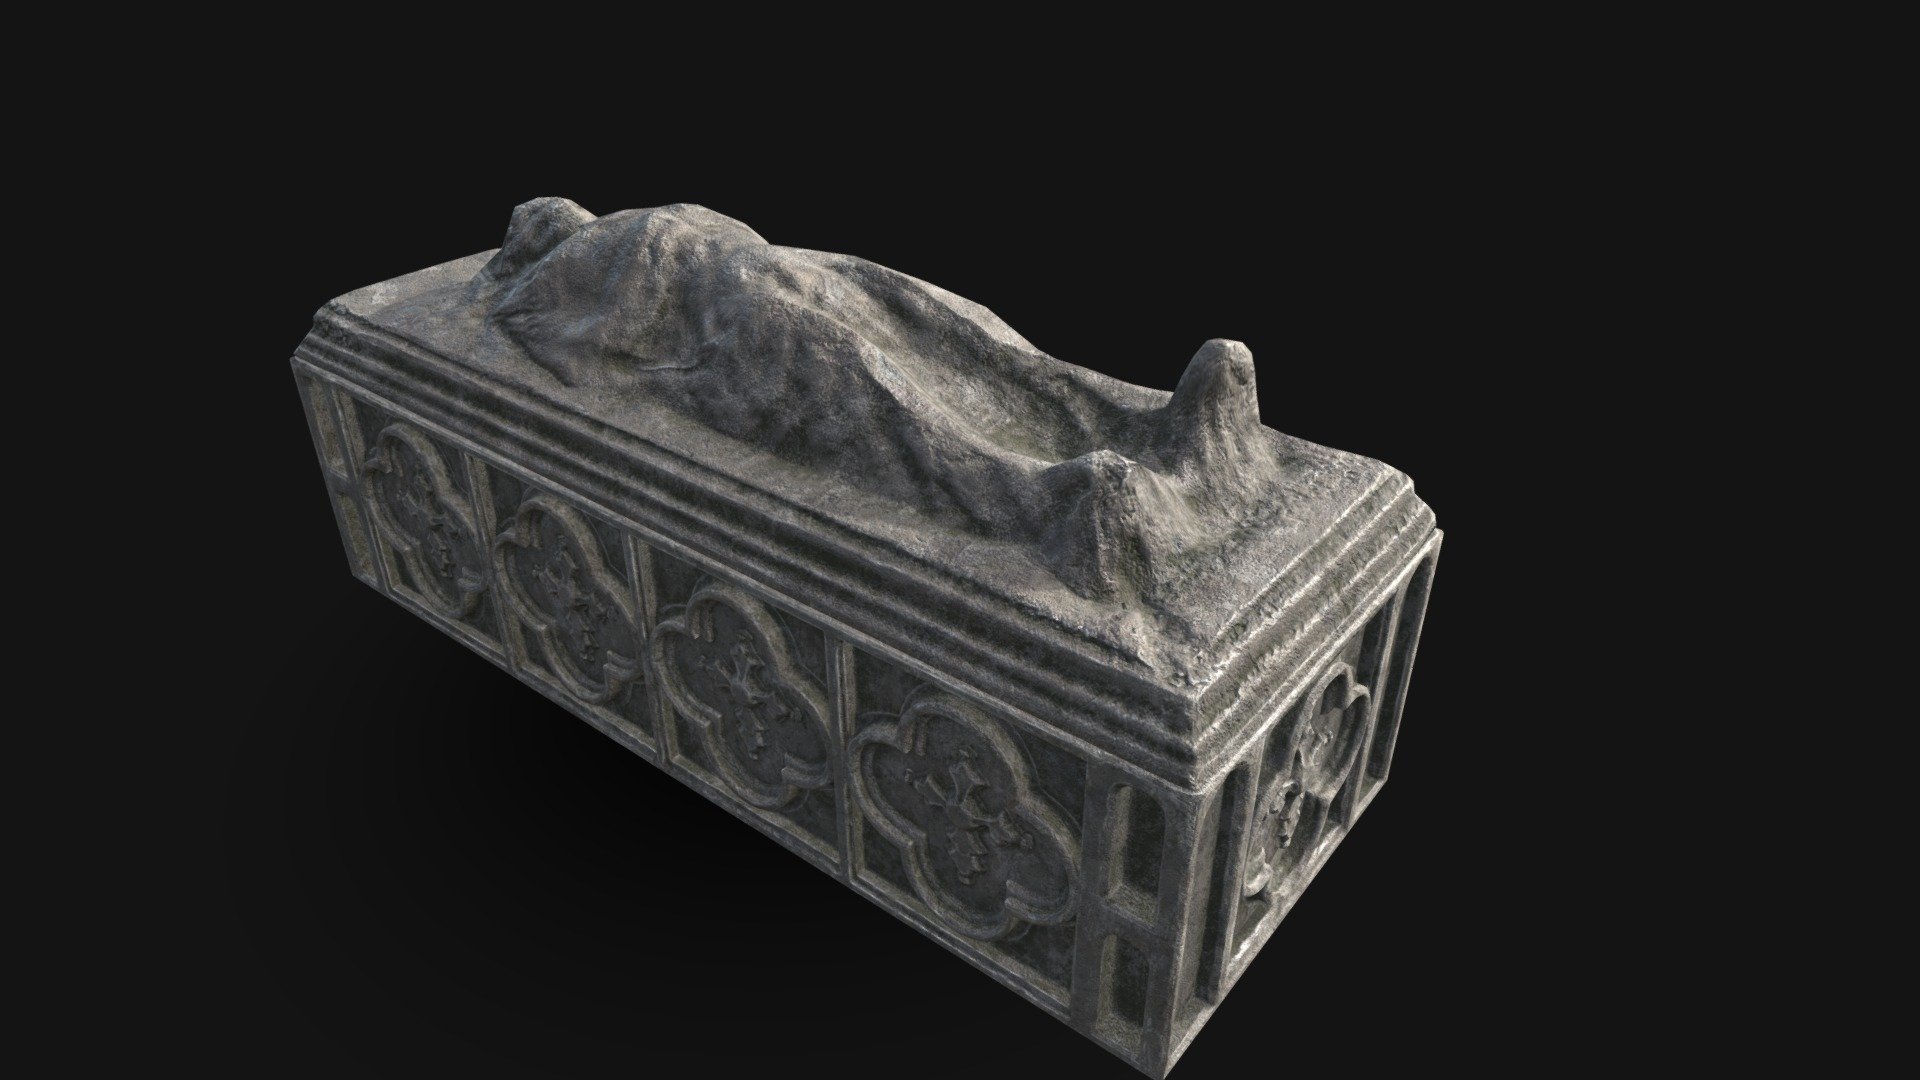 Medieval Gothic Crypt 3D Model. This model contains the Medieval Gothic Crypt itself 

All modeled in Maya, textured with Substance Painter.

The model was built to scale and is UV unwrapped properly. Contains a 4K and 2K texture set.  

⦁   33780 tris. 

⦁   Contains: .FBX .OBJ and .DAE

⦁   Model has clean topology. No Ngons.

⦁   Built to scale

⦁   Unwrapped UV Map

⦁   4K Texture set

⦁   High quality details

⦁   Based on real life references

⦁   Renders done in Marmoset Toolbag

Polycount: 

Verts 18274

Edges 35220 

Faces 16960

Tris 33780

If you have any questions please feel free to ask me 3d model